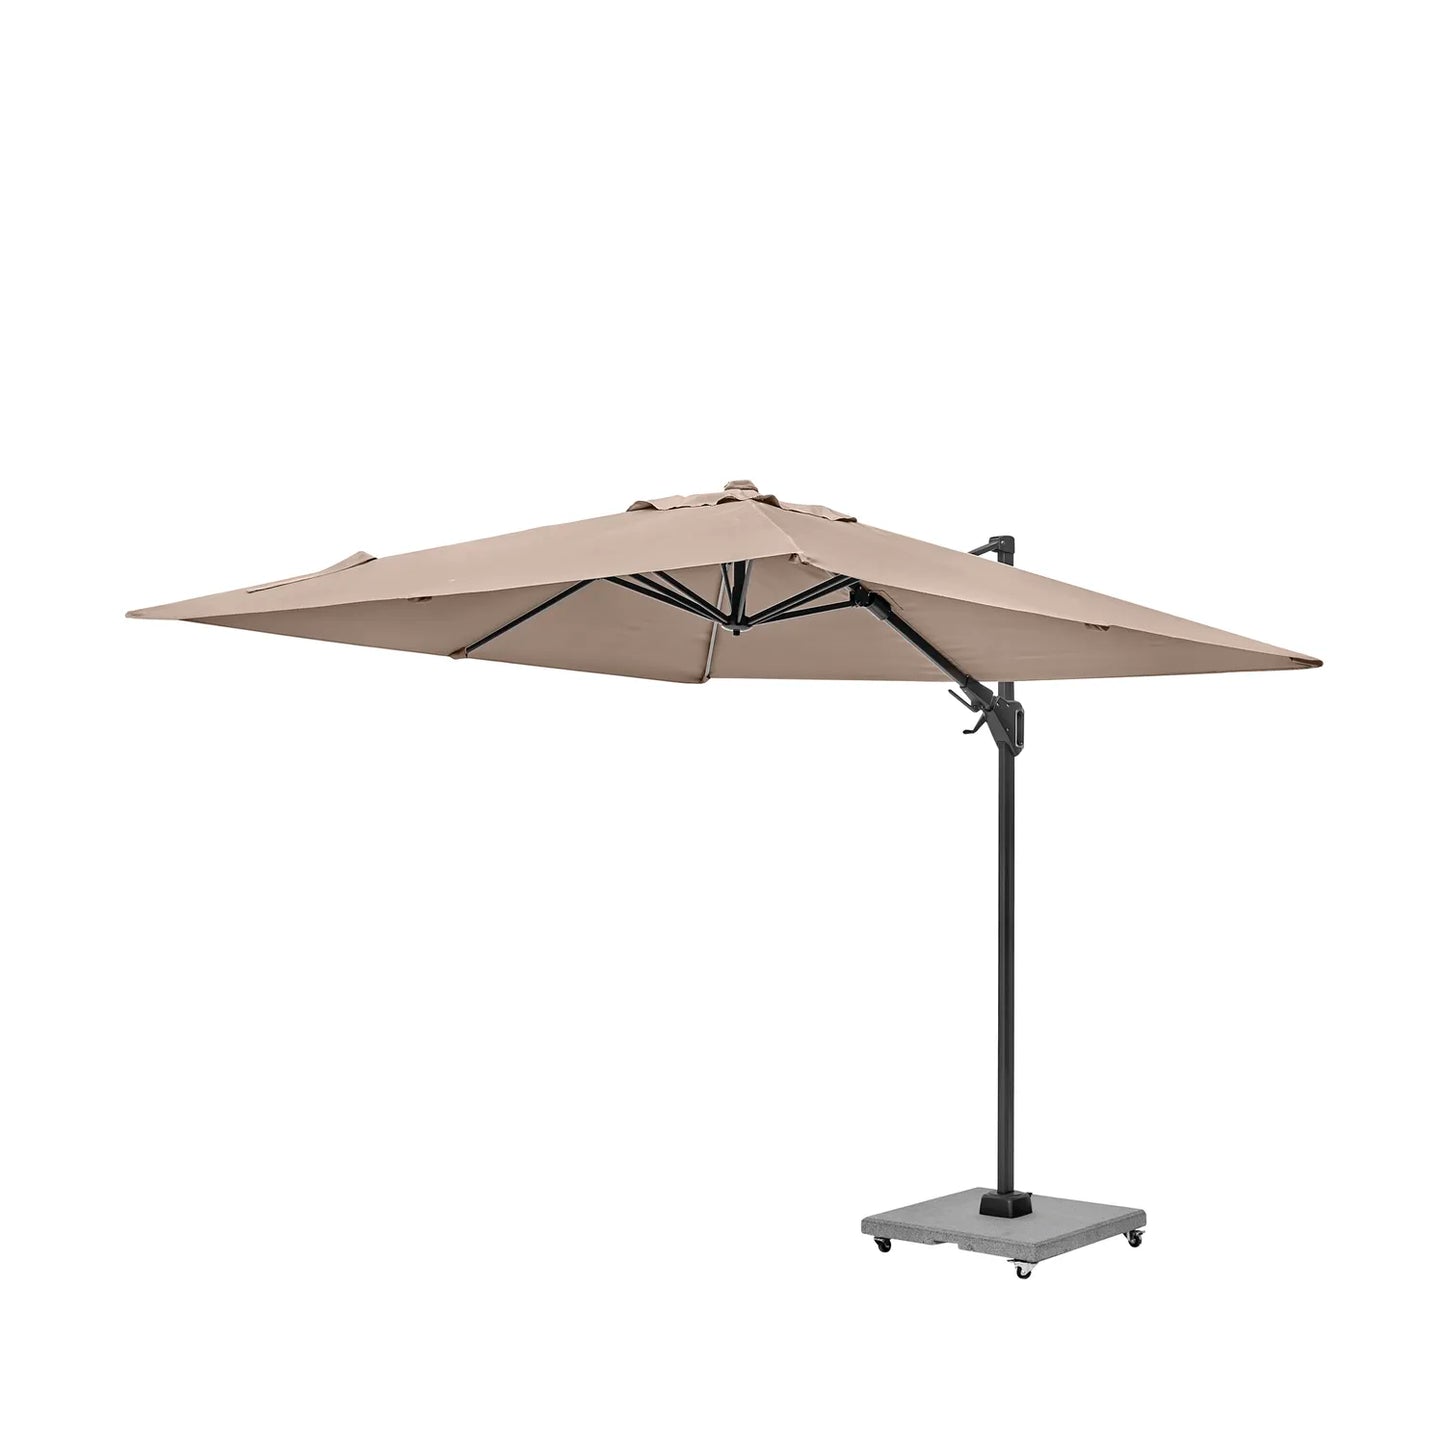 Platinum Voyager T2 2.7m Square Cantilever Parasol in Taupe – Click Style